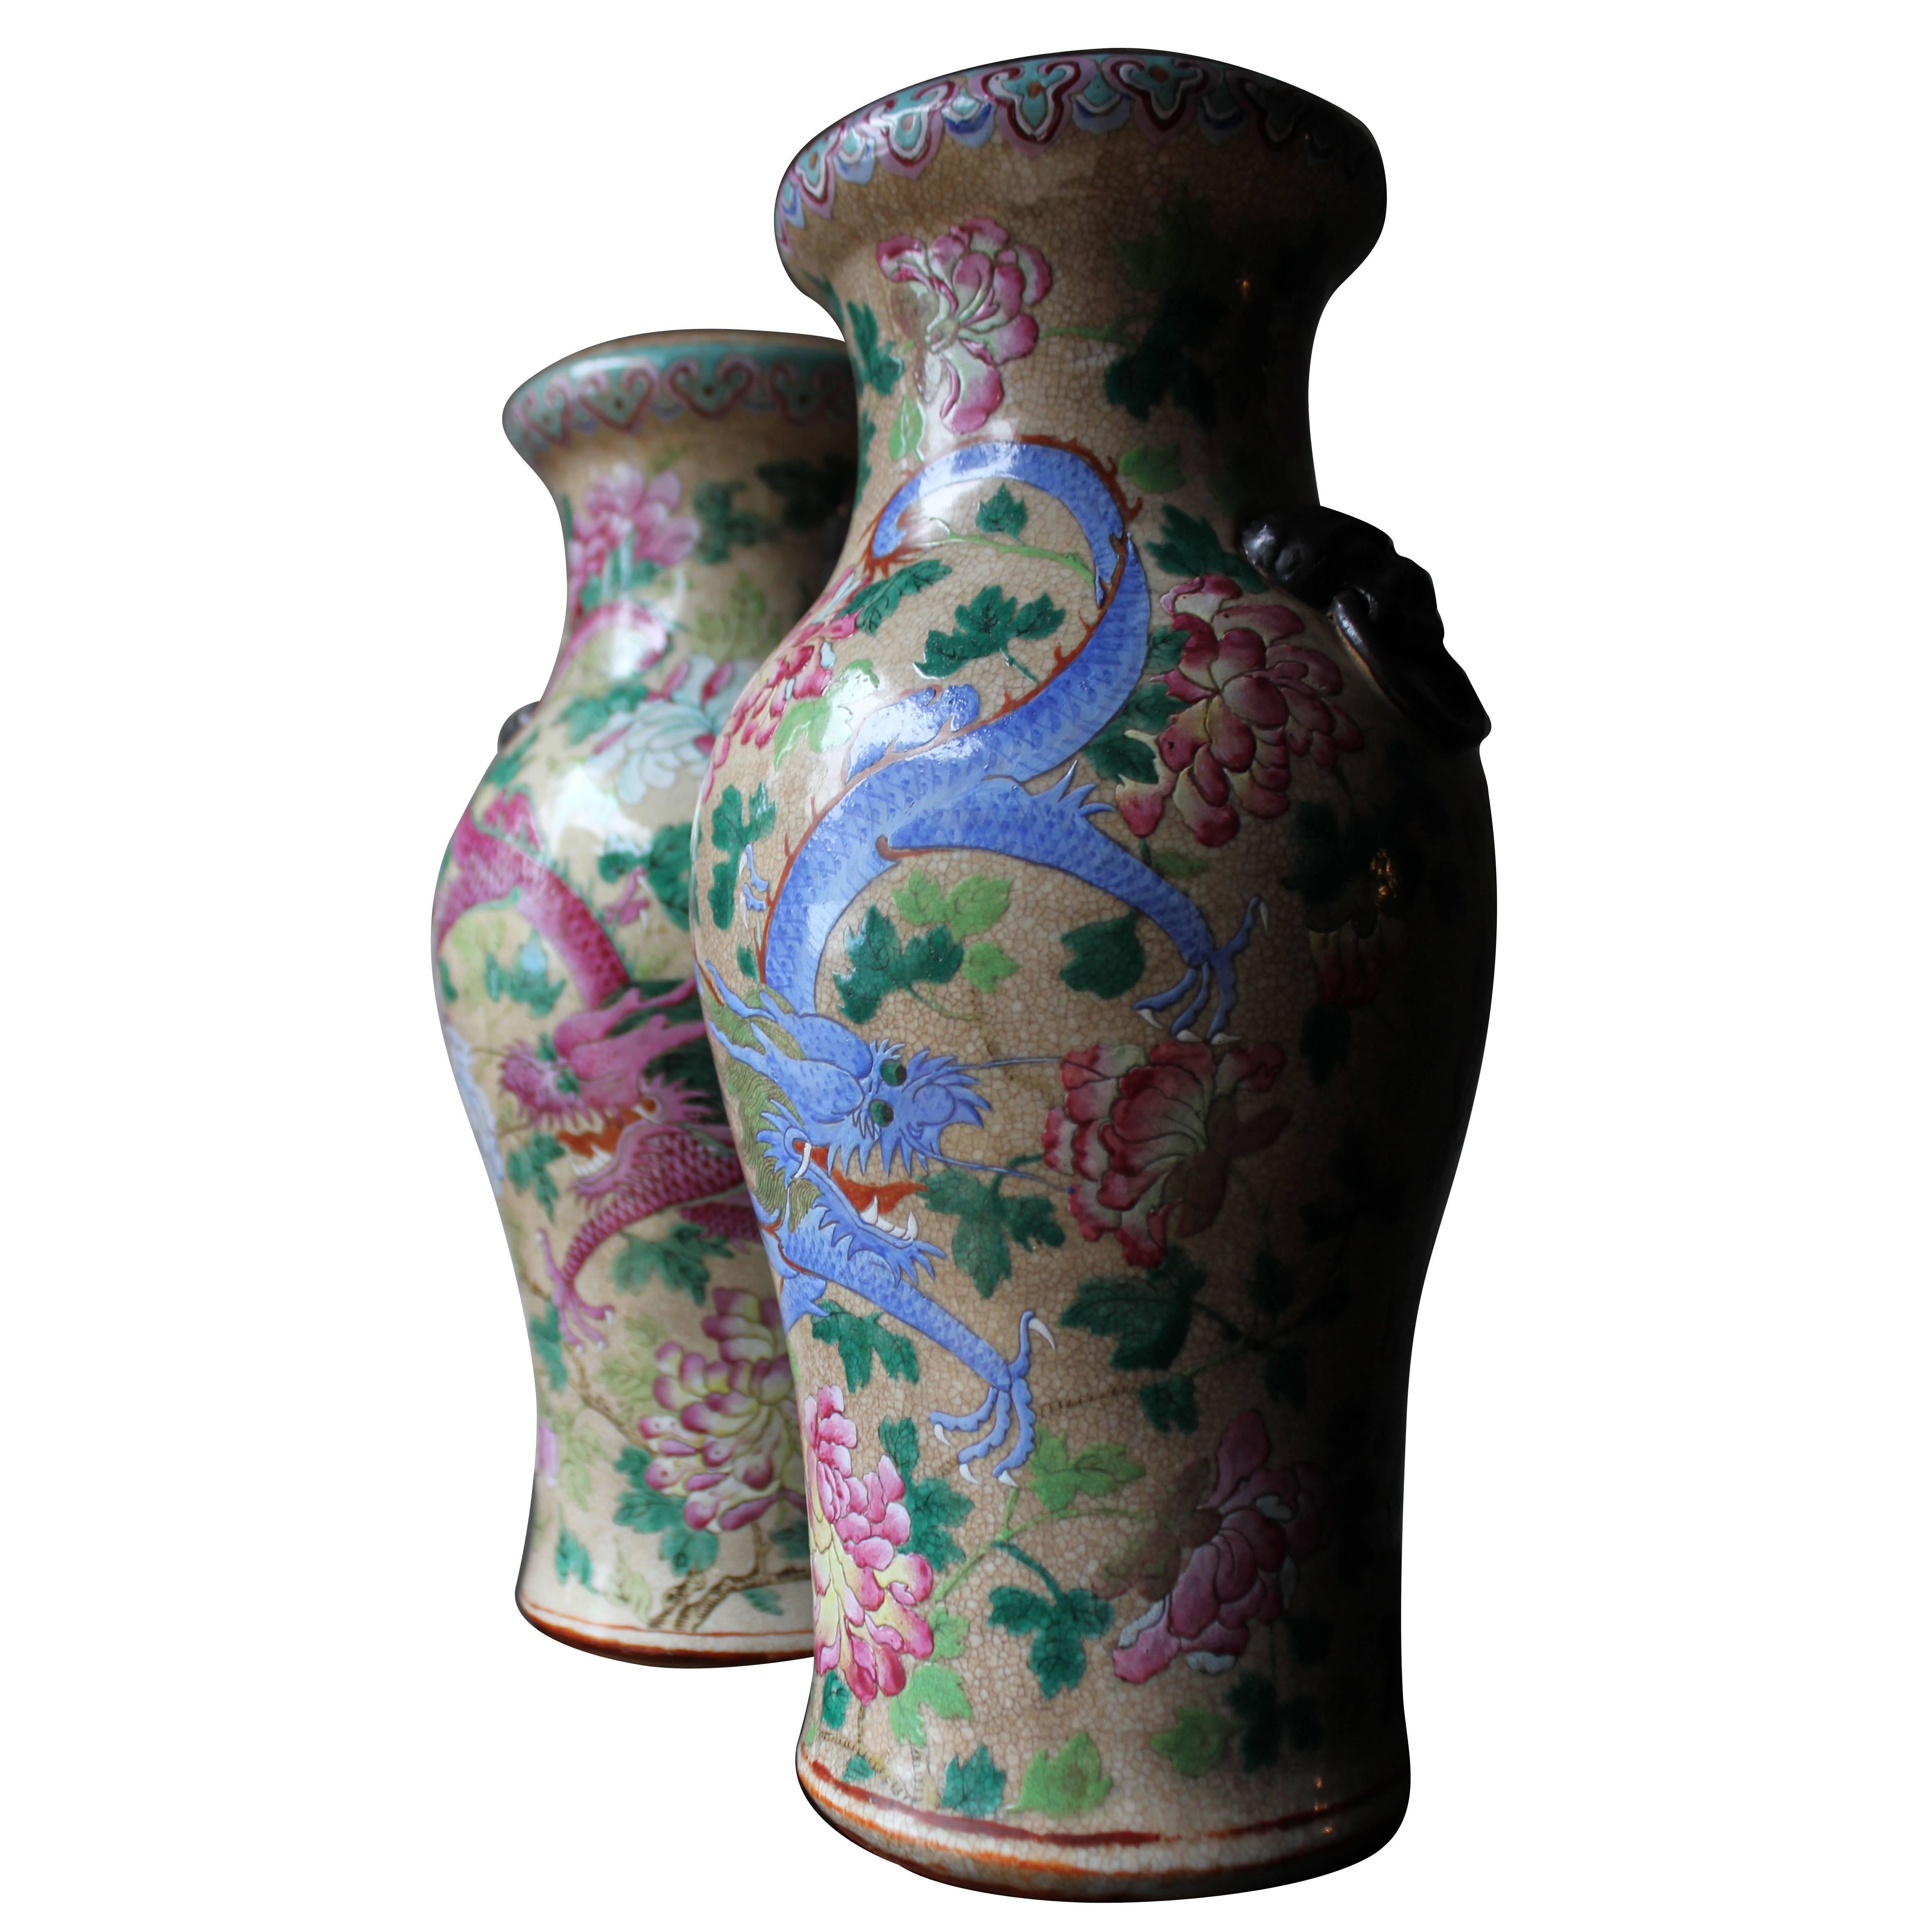 Intriguing Pair of Chinese Famille Rose Porcelain Vases, circa 1790-1810